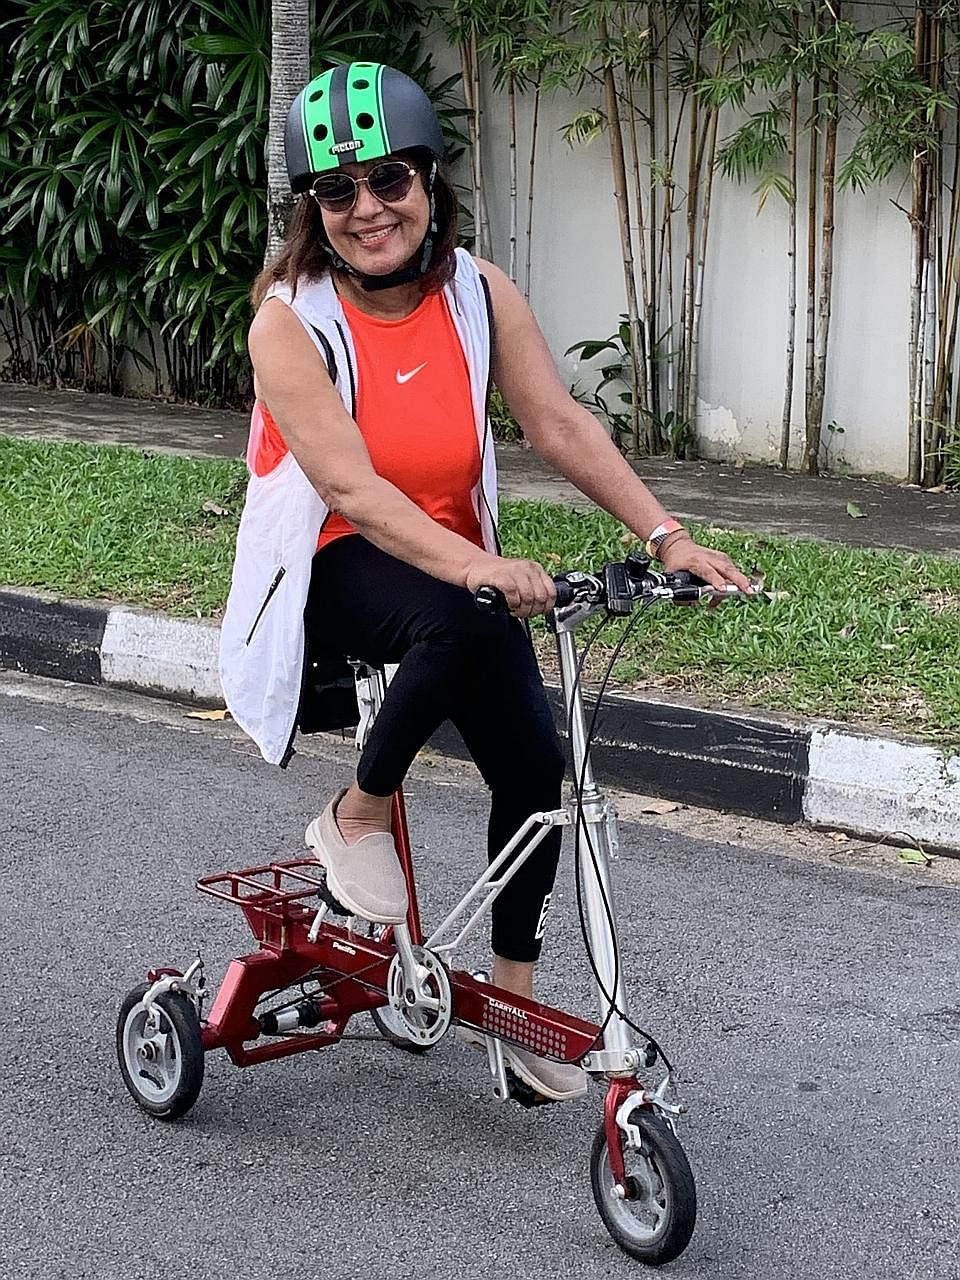 Lucy Shaw had a stroke almost nine years ago and after rehabilitation, she now cycles and does yoga, among other activities. Shaw will take part in the Singapore National Stroke Association's Stepping Out for Stroke virtual walk and The Straits Times